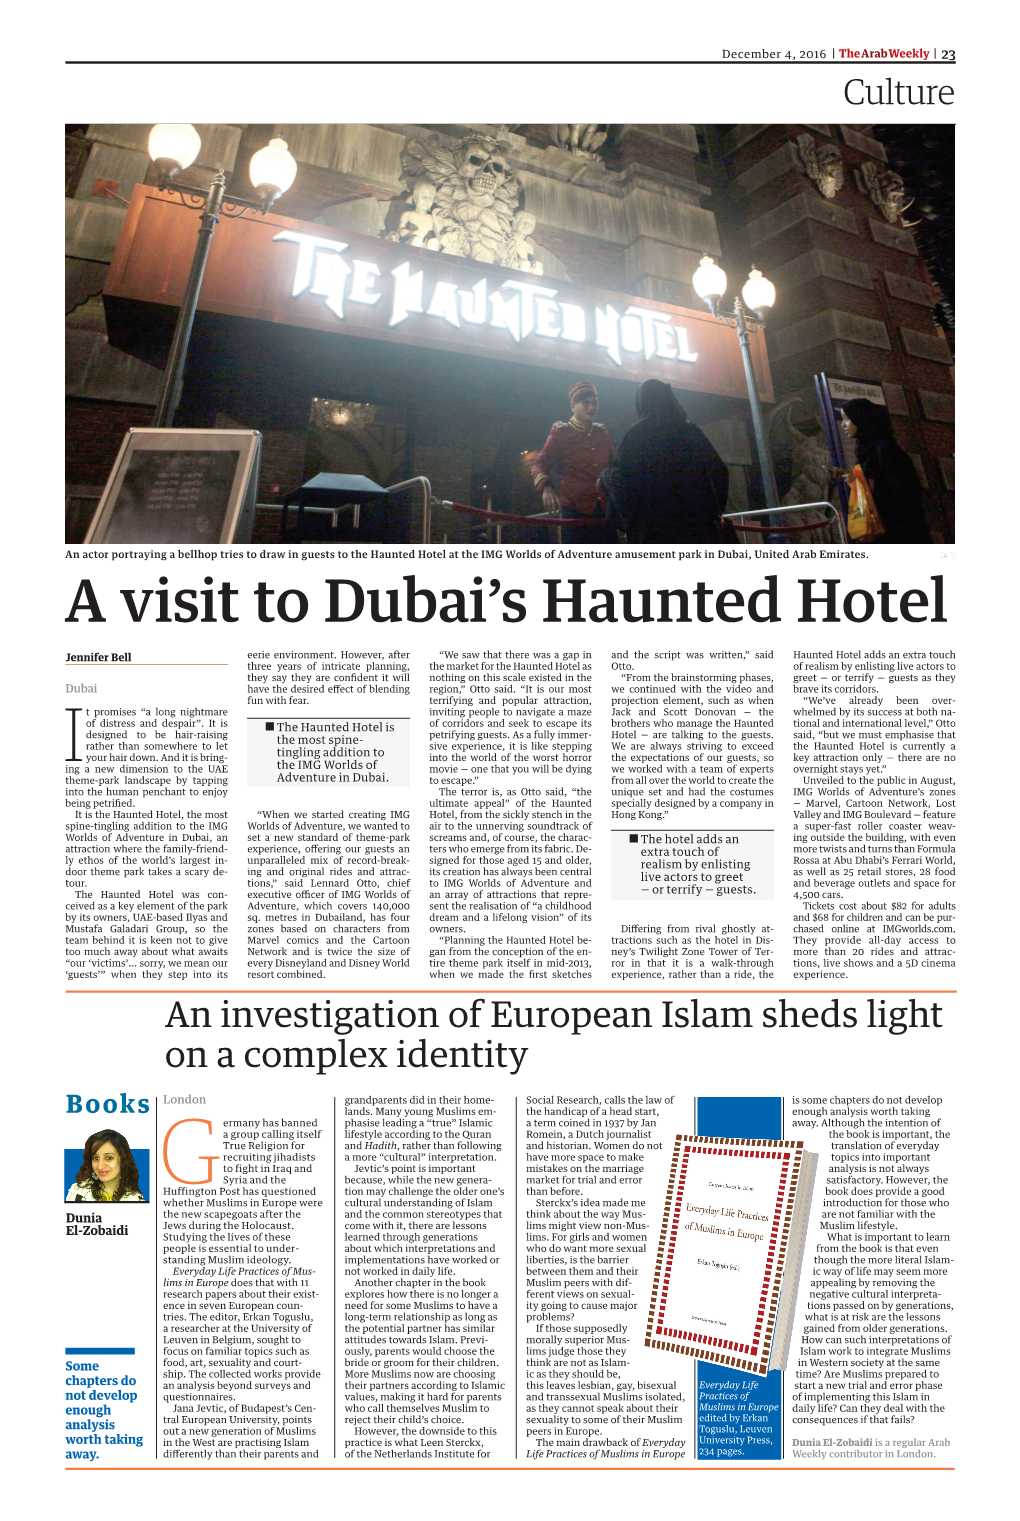 A Visit to Dubai's Haunted Hotel